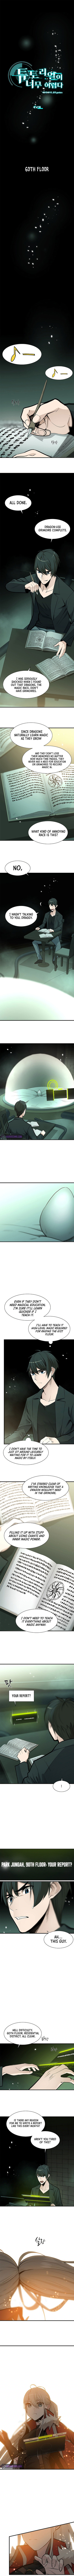 the-tutorial-is-too-hard-chap-47-1